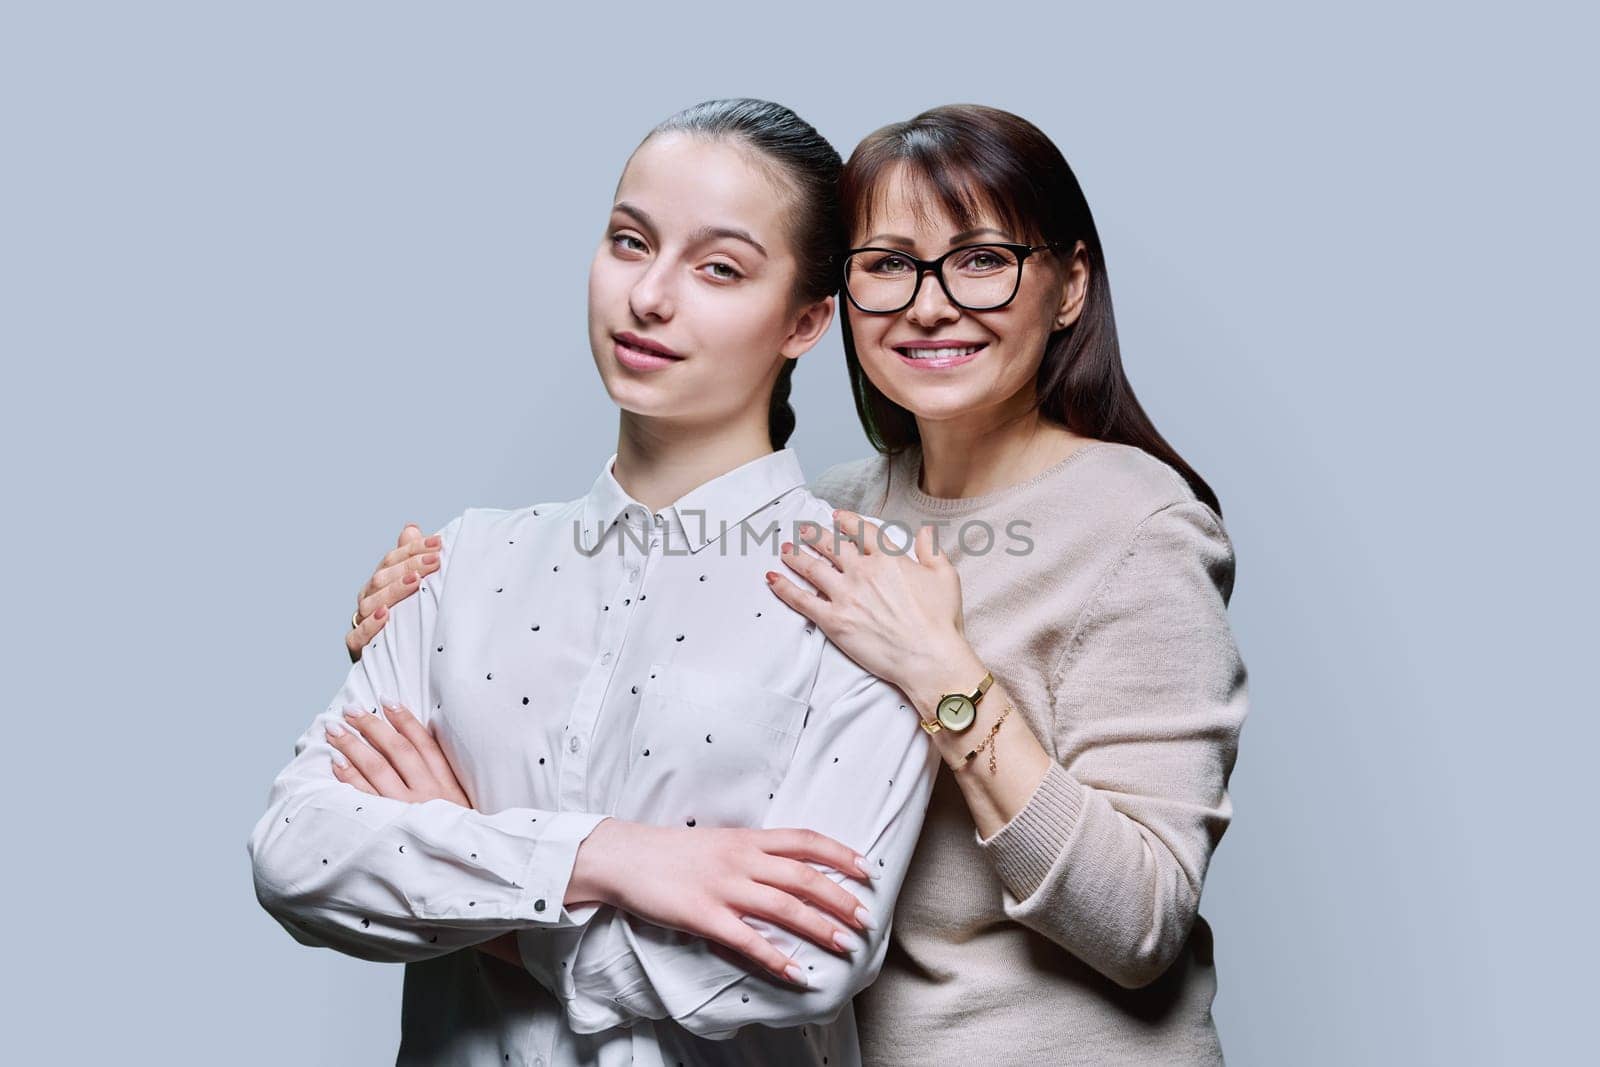 Portrait of middle aged mother and teenage daughter embracing together on grey studio background. Smiling happy mom and girl looking at camera. Family, lifestyle, relationship, mother's day concept